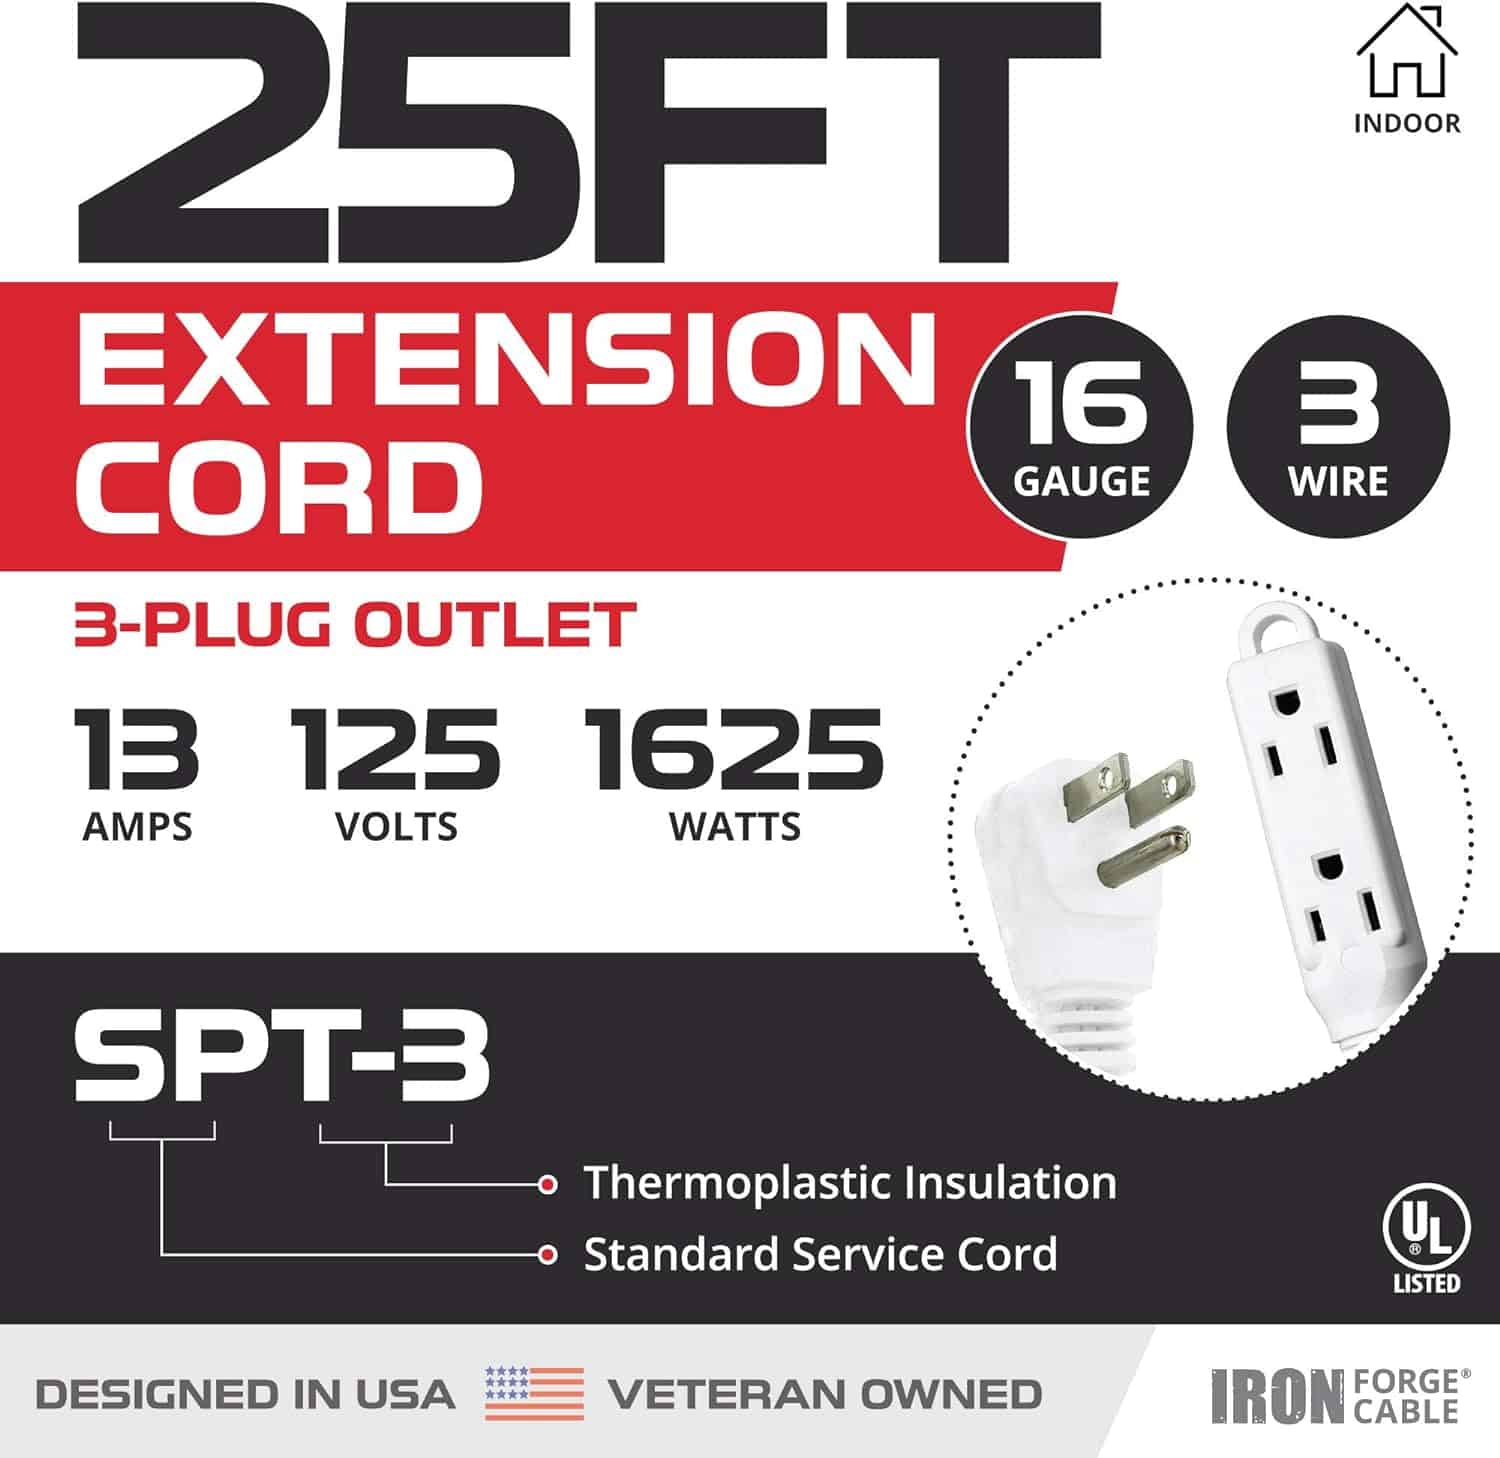 Iron-Forge-Cable-Flat-Plug-White-Extension-Cord-with-3-Outlets-25-Ft16-3-Heavy-Duty-3-Prong-Extension-Cord-with-Multiple-Outlets-Power-Outlet-for-Home-Garage-Workshop-16-AWG-Indoor-Extension-Cord